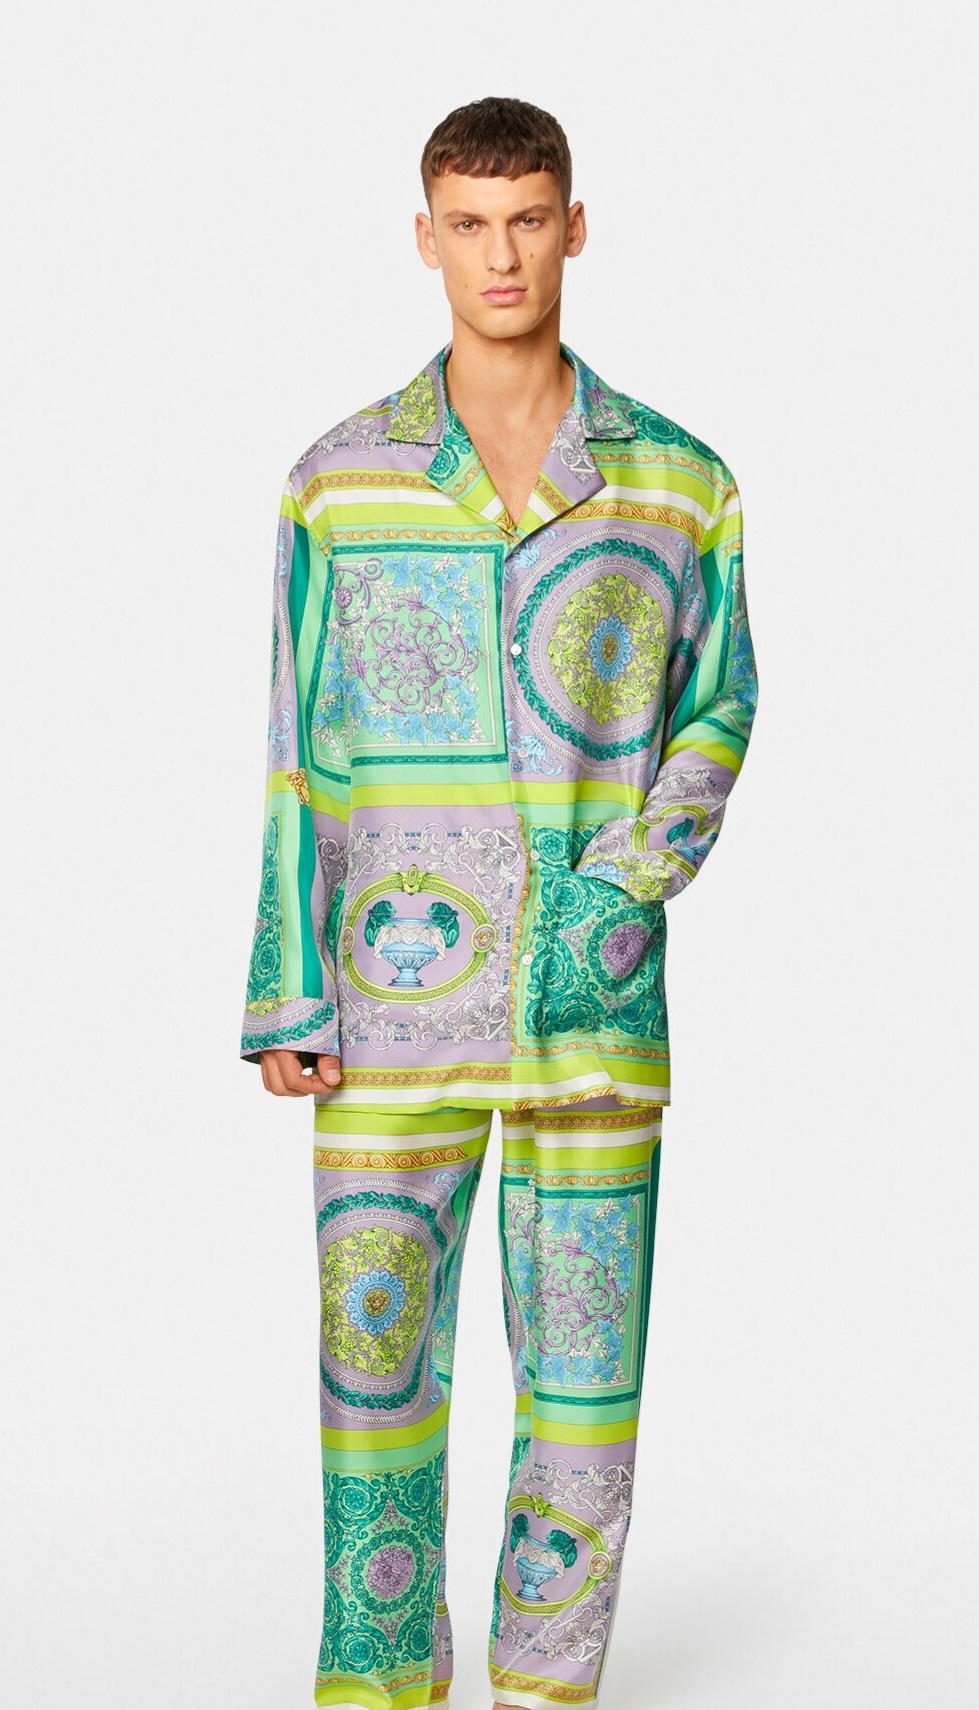 Versace mosaic barocco pajama silk shirt from the Resort 2021 flash collection with barocco prints in radiant pastel colors.

Condition: Excellent.

Size: Men’s pajama shirt size 5 (IT 50), US size large. This can be worn Unisex.

Material: 100%